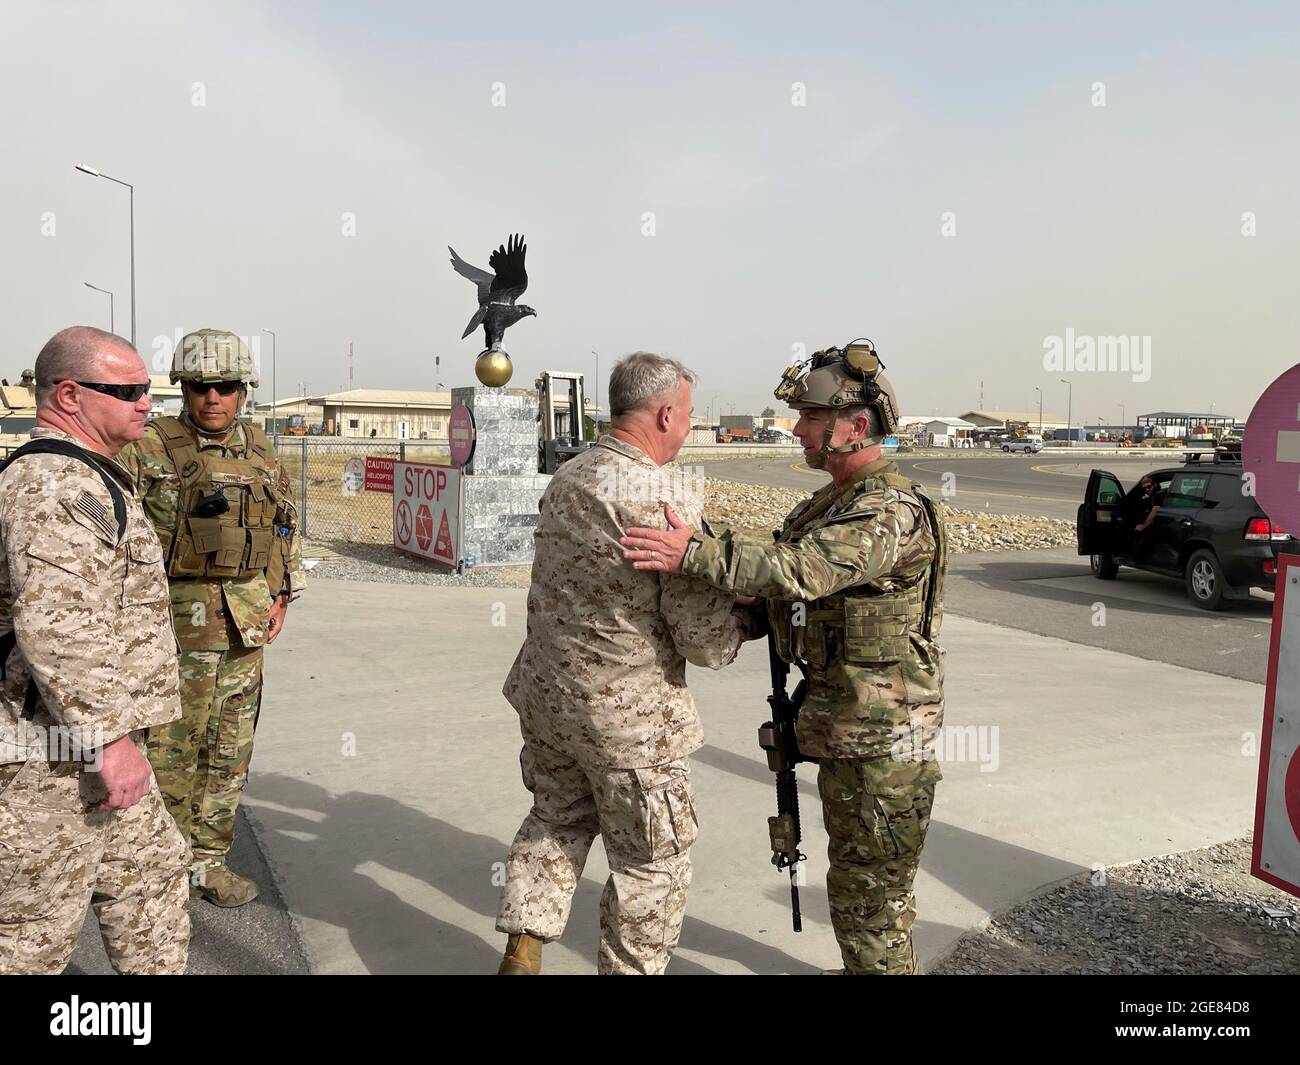 Kabul, Afghanistan. 17th Aug, 2021. U.S. Marine Corps Gen. Frank McKenzie, left, the commander of U.S. Central Command, greets Navy Rear Adm. Peter Vasely, commander of U.S. Forces Afghanistan-Forward, at Hamid Karzai International Airport August 17, 2021 in Kabul, Afghanistan. Credit: Planetpix/Alamy Live News Stock Photo